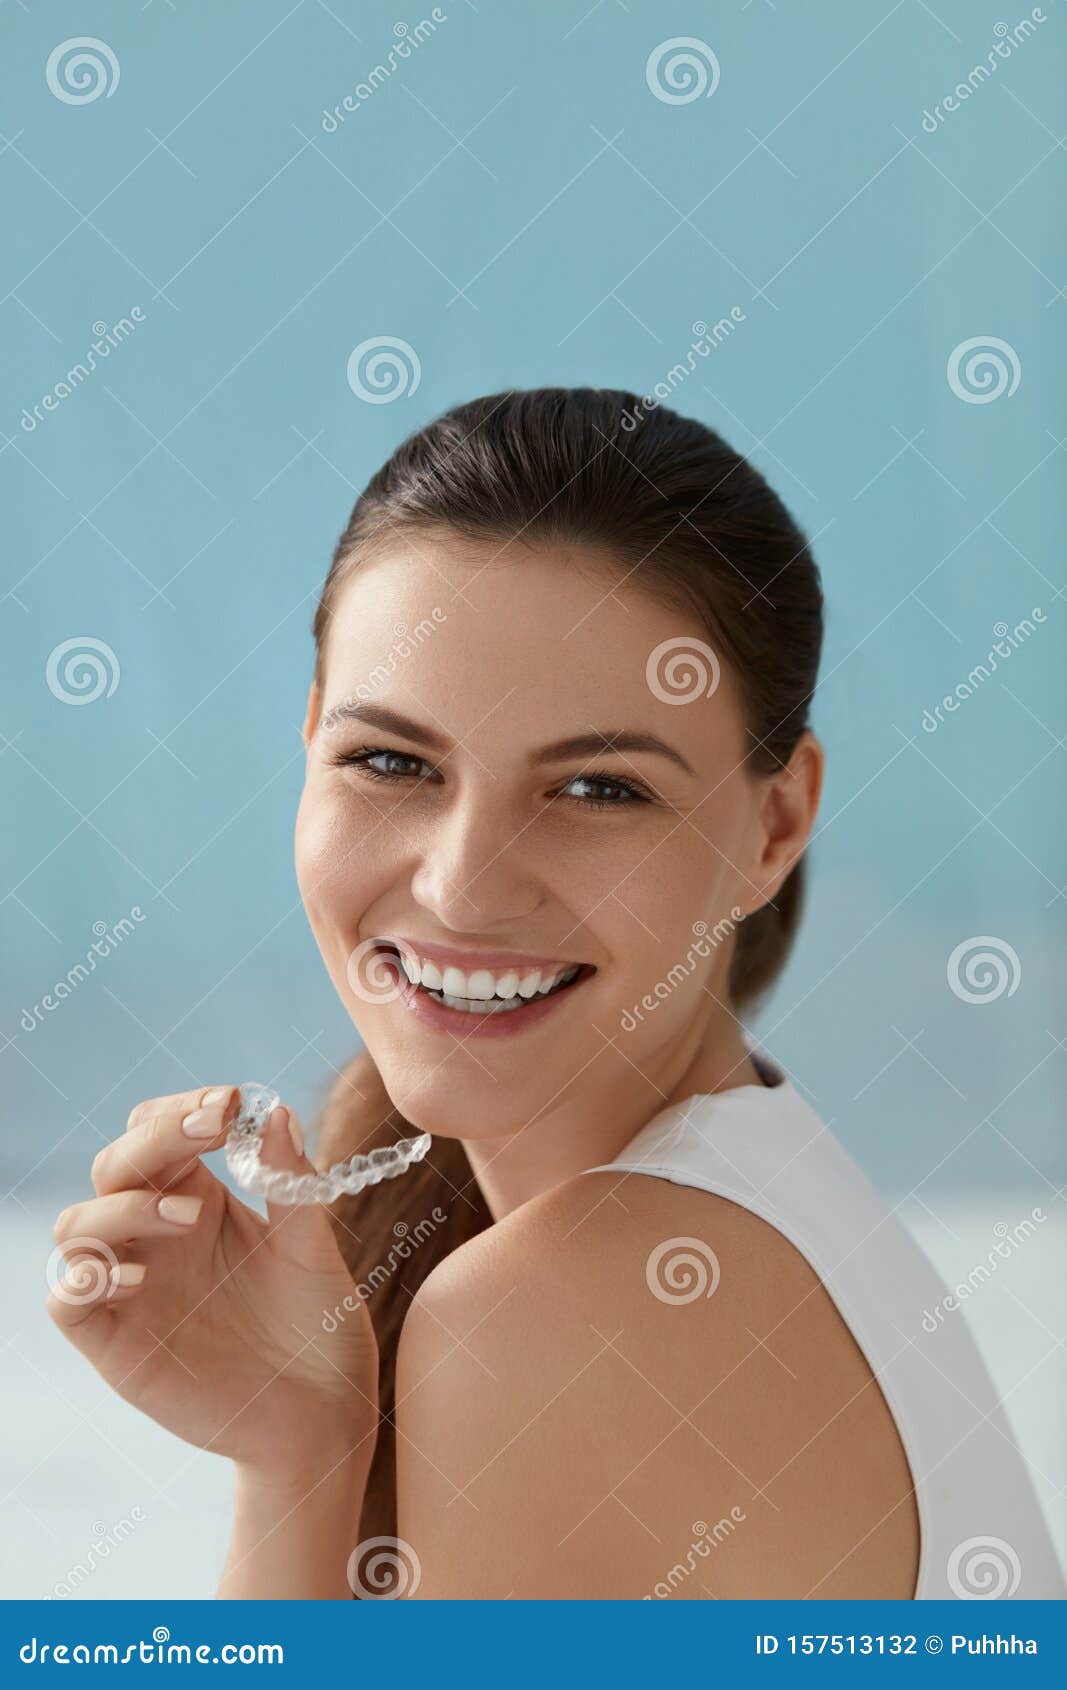 dental care. smiling woman with white smile using whitening tray